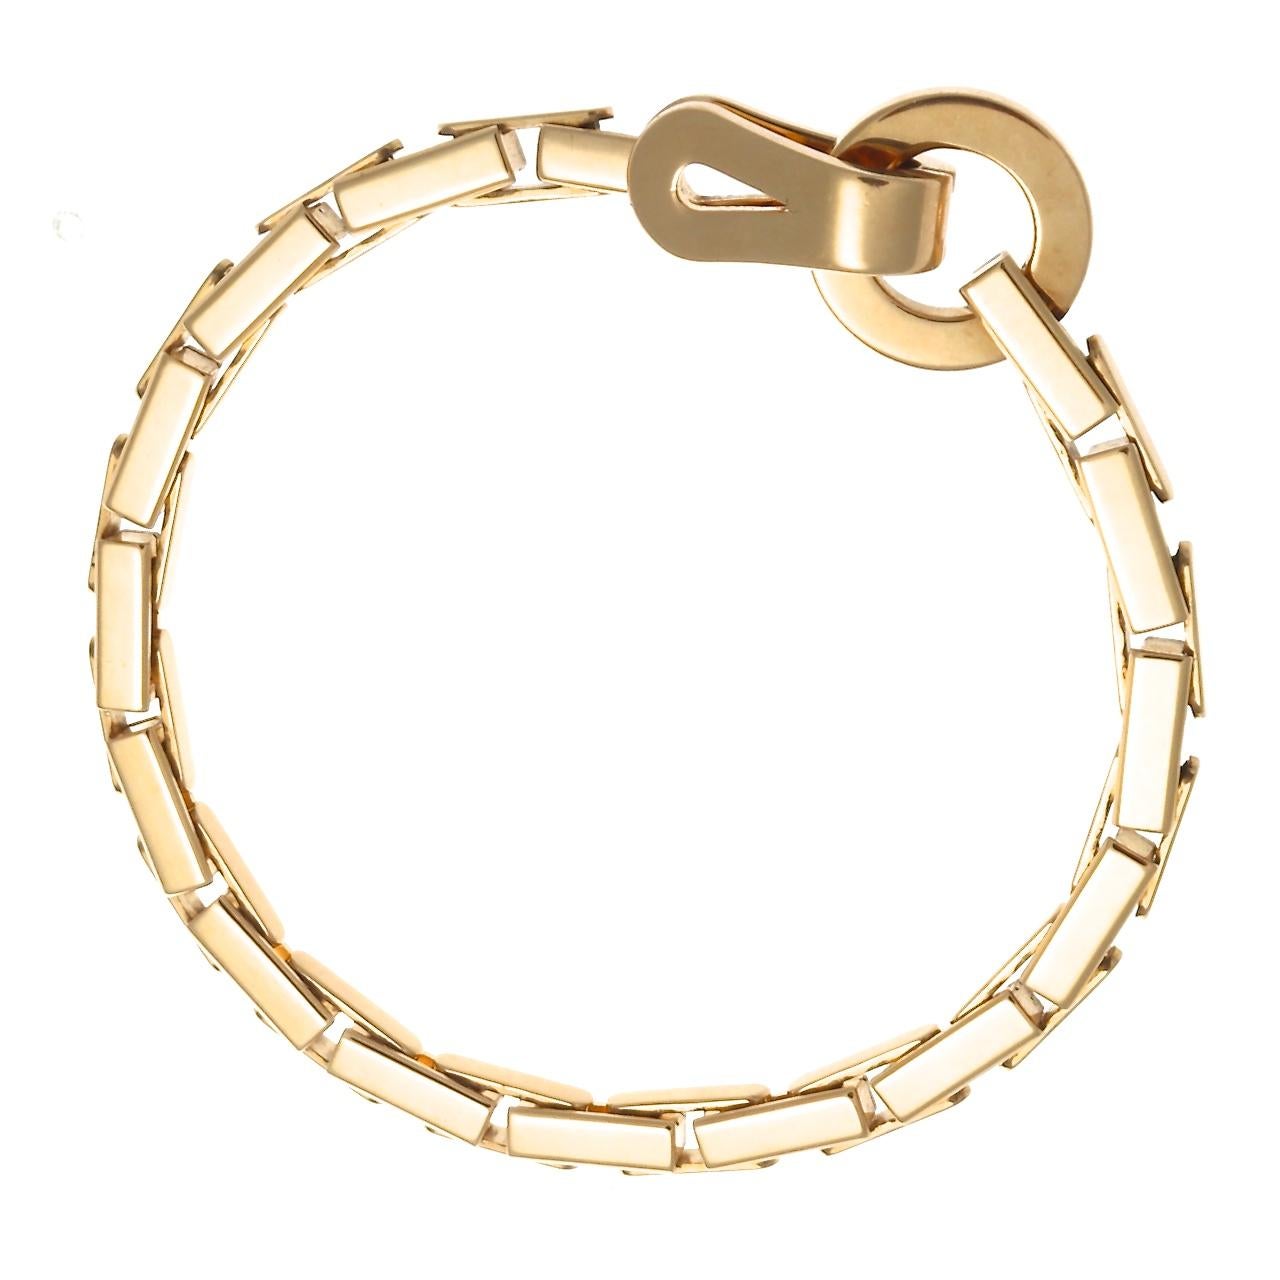 With distinctly Cartier rivets and the most unique clasp you'll ever find, this Cartier bracelet from the Agrafe collection has exciting components that are nothing short of delightful. Another fabulously timeless piece from the inimitable house of